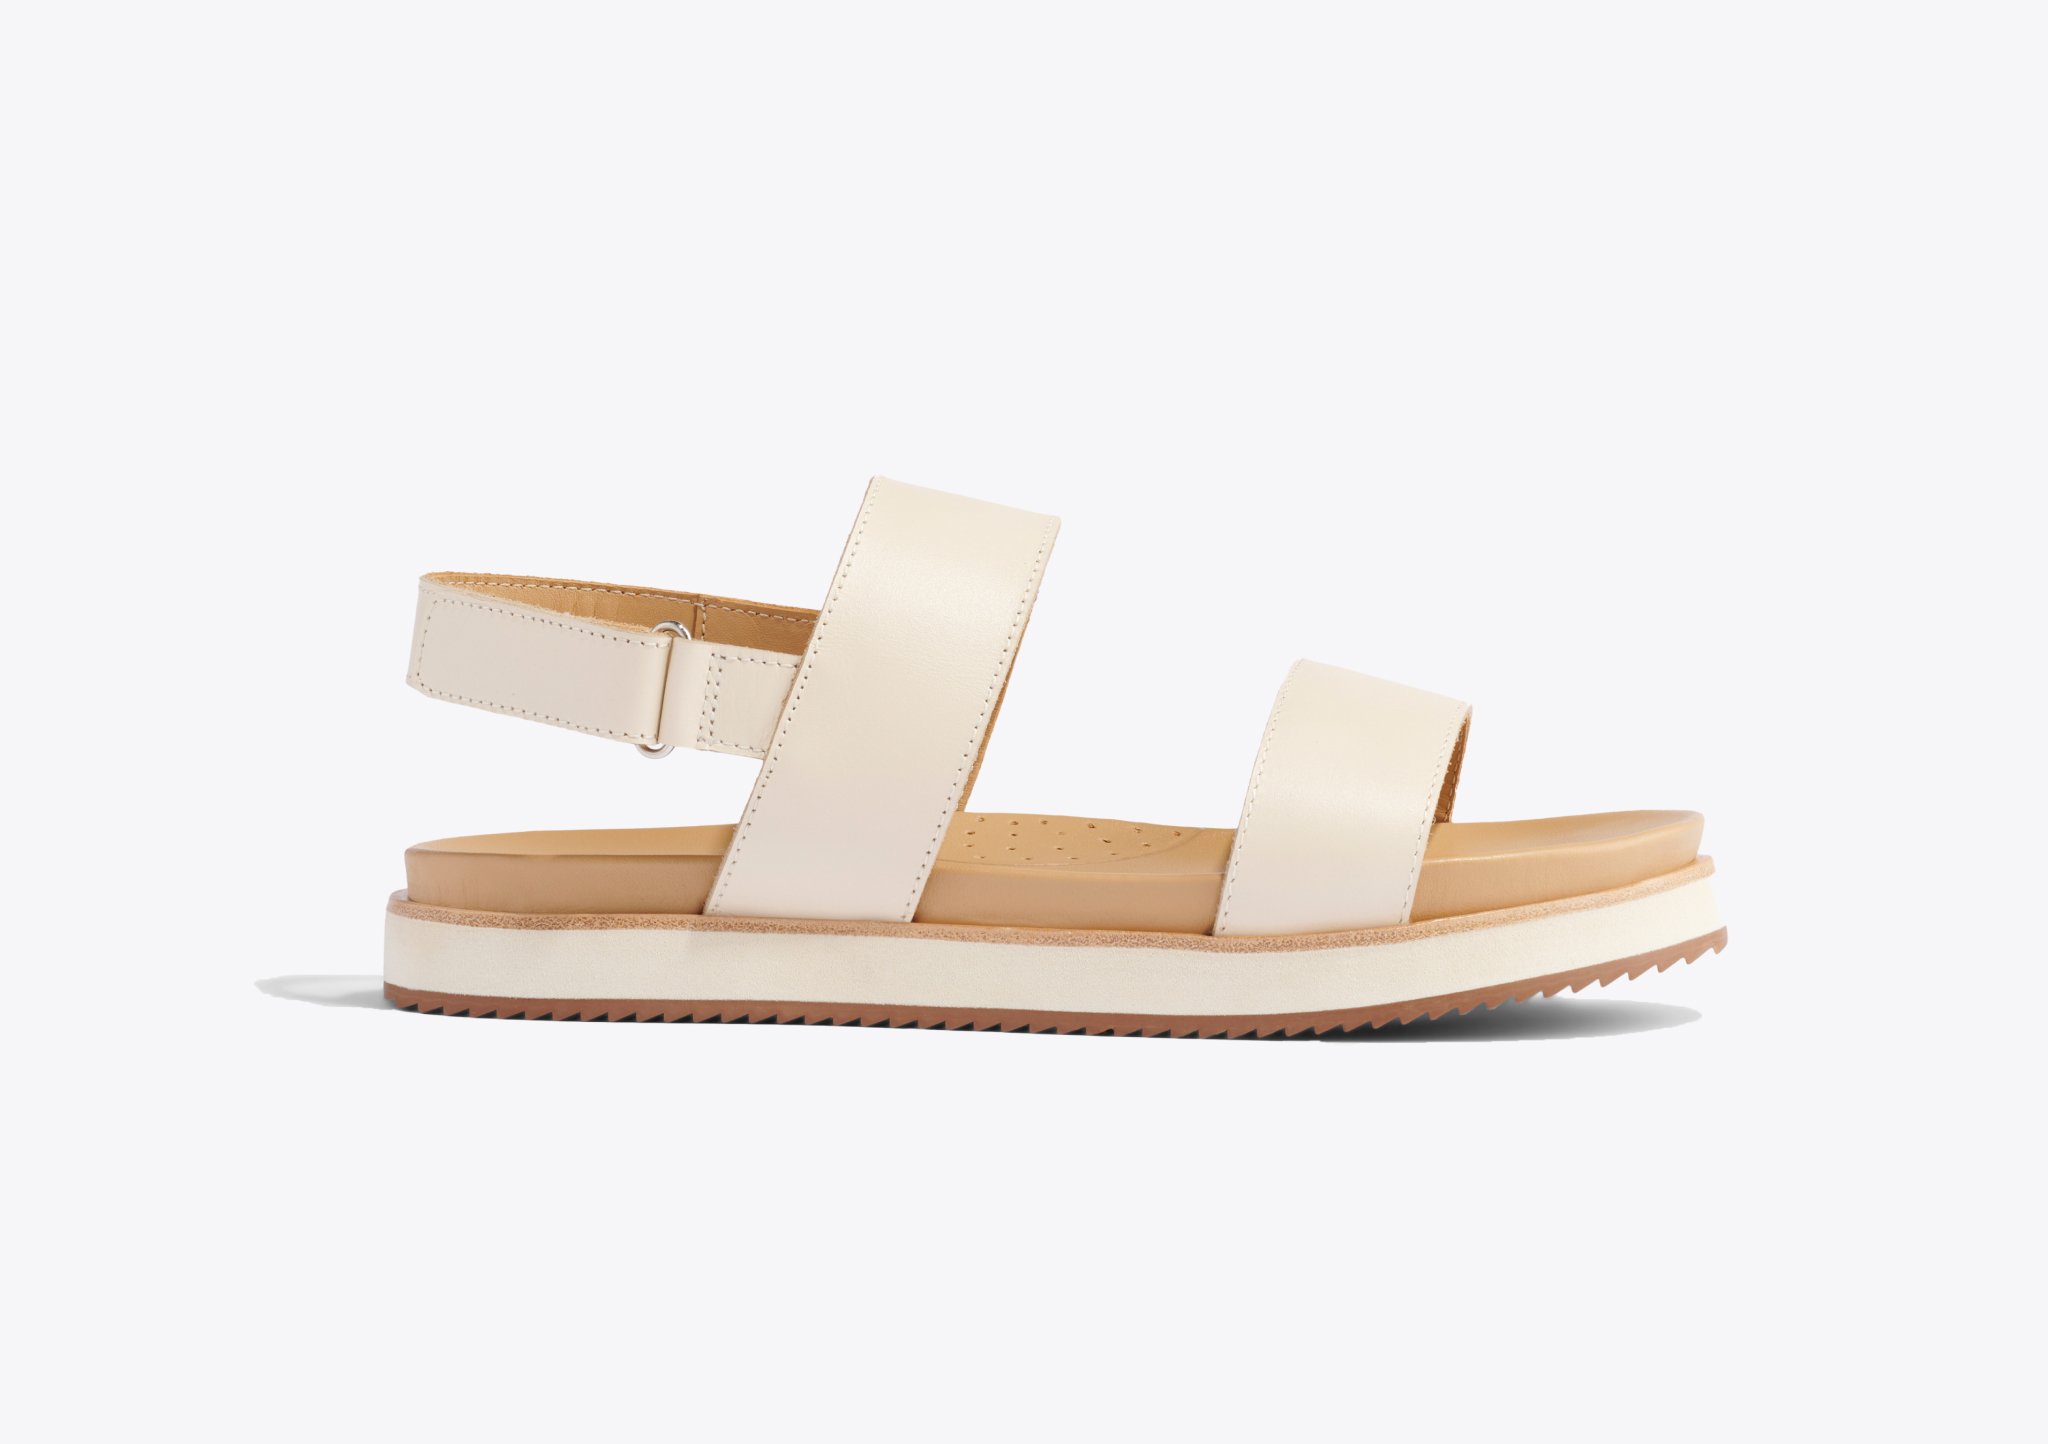 Nisolo Go-To Flatform Sandal 2.0 Bone - Every Nisolo product is built on the foundation of comfort, function, and design. 